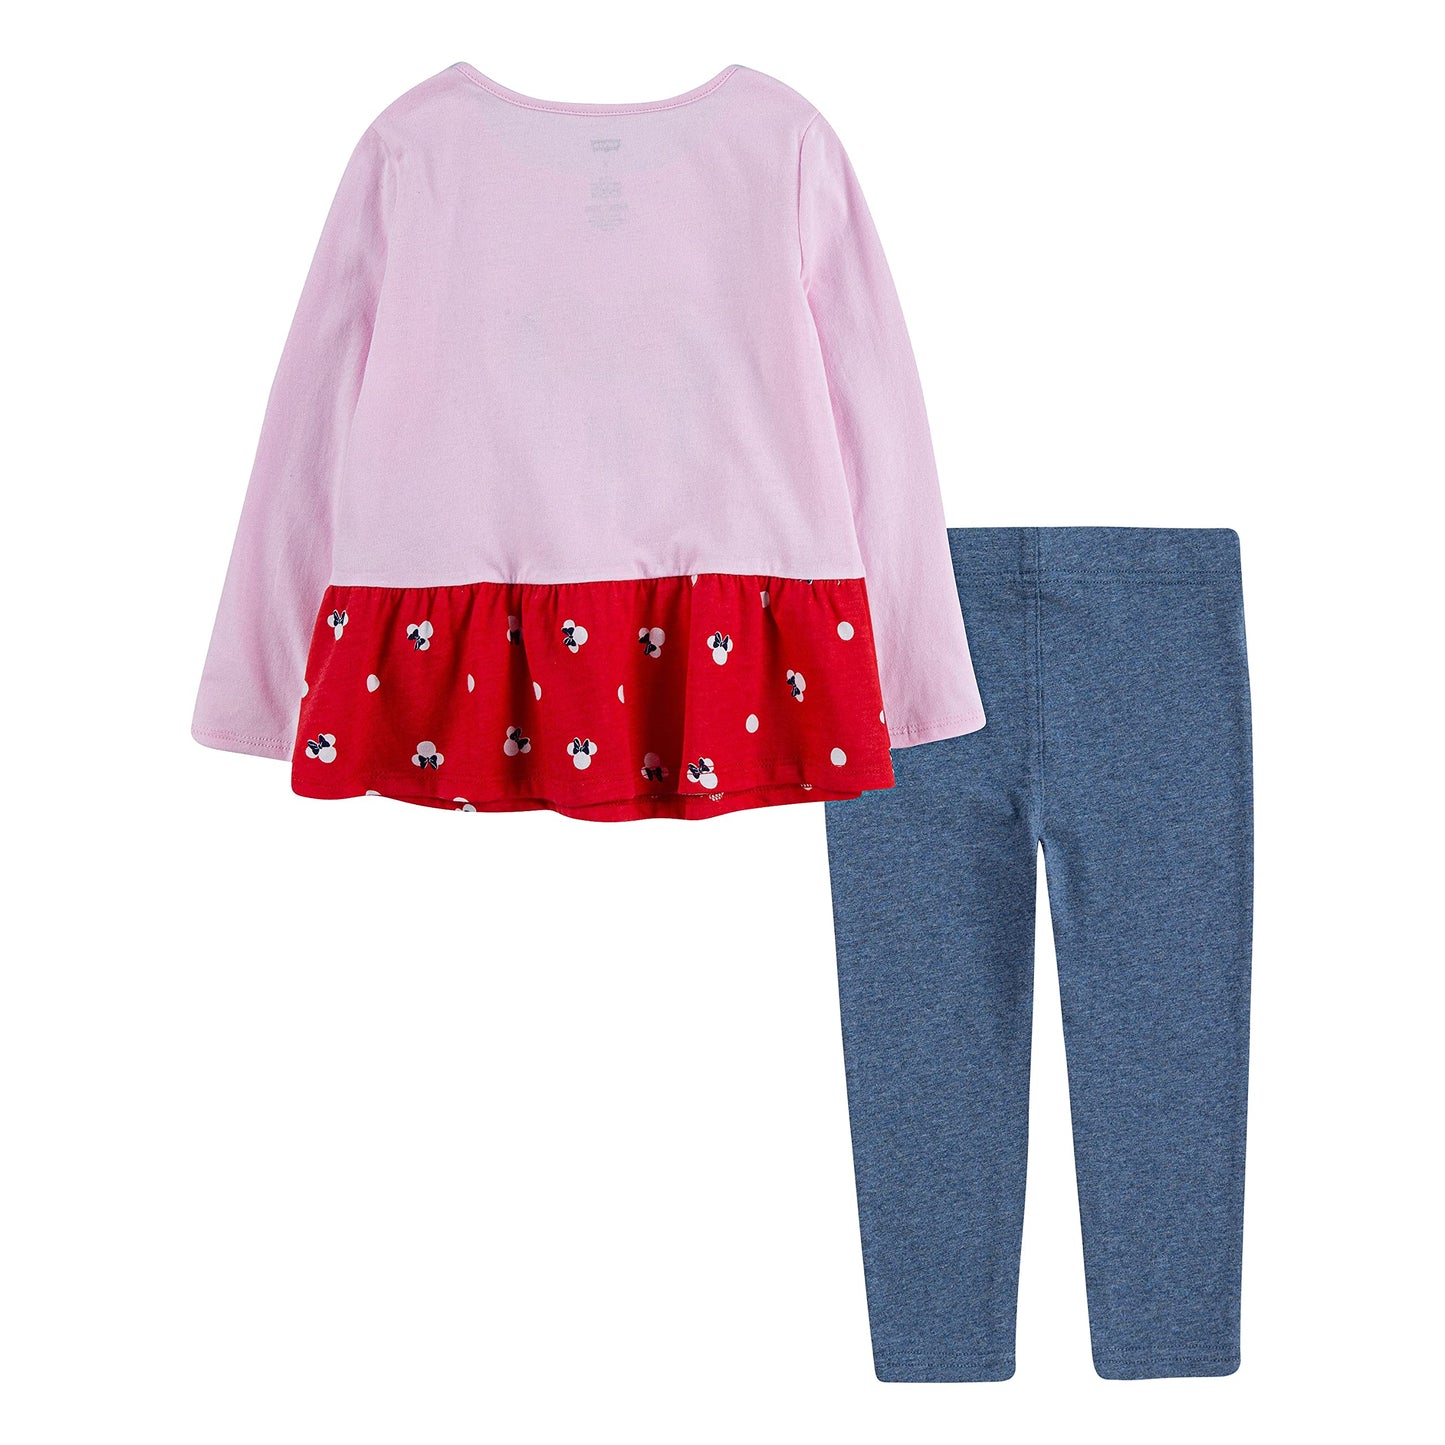 Image 2 of Levi's x Disney Minnie Mouse T-Shirt and Leggings Set (Toddler)